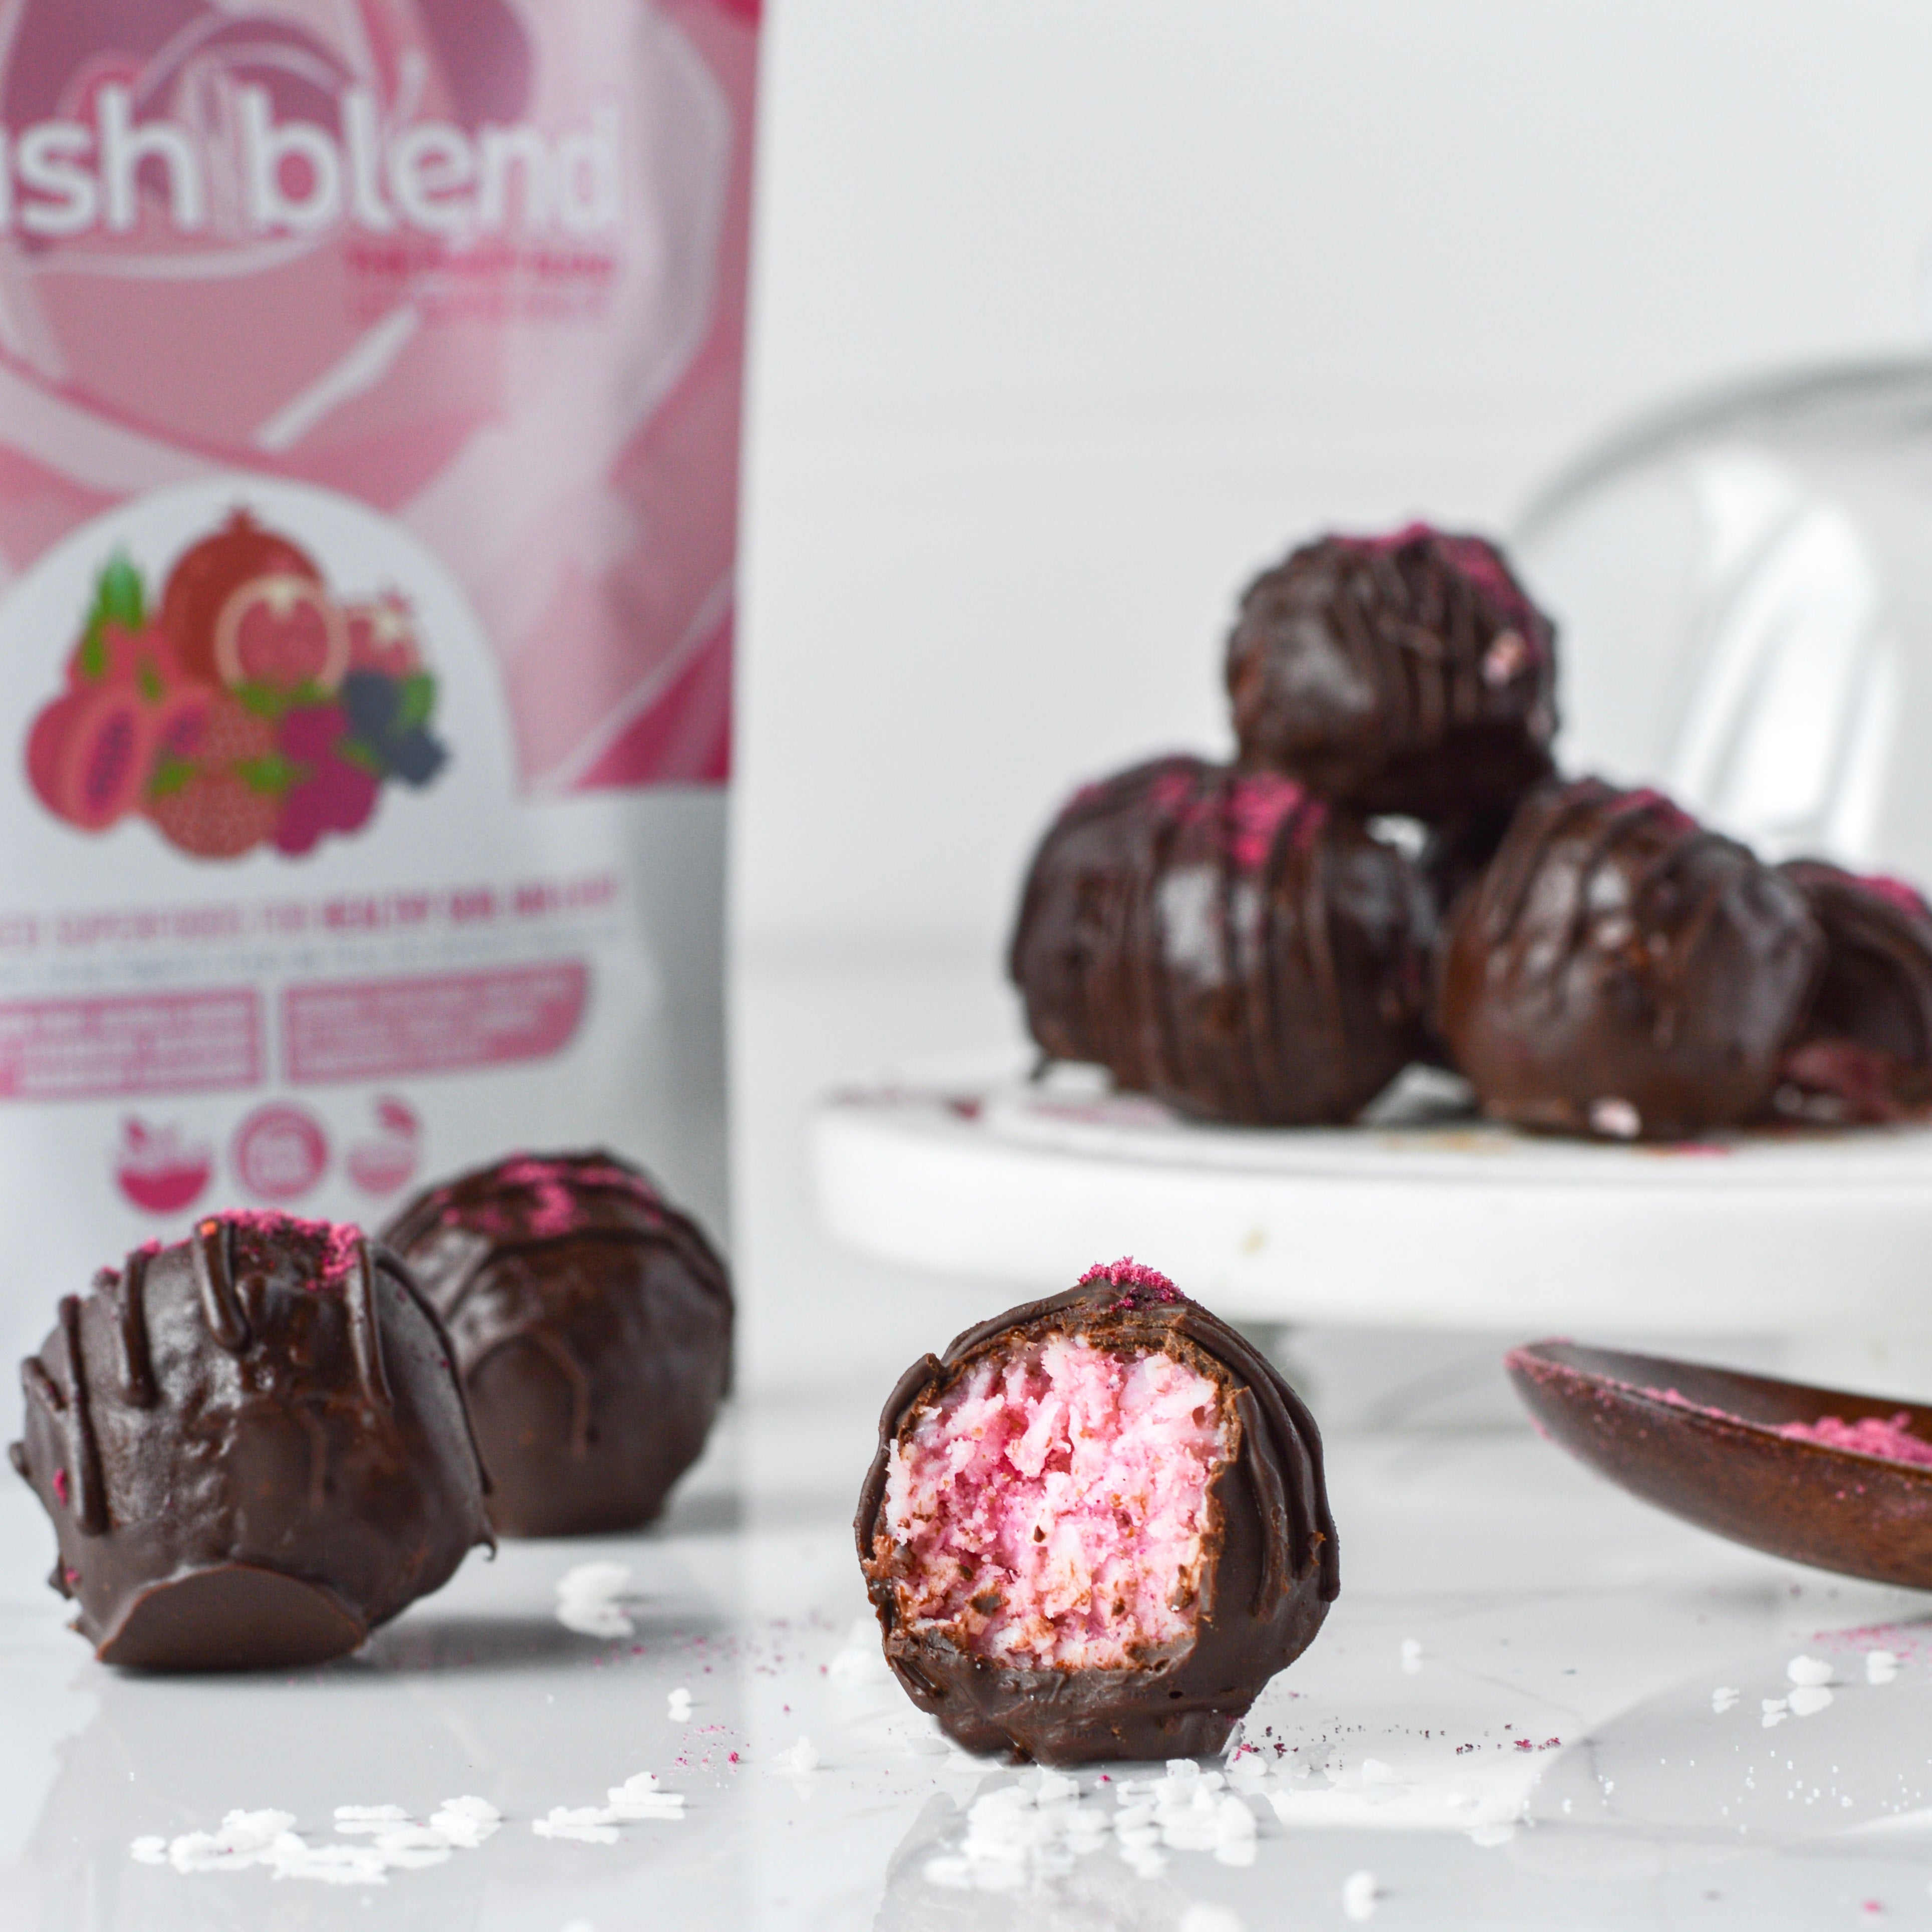 Blush Coconut Bites made using Smoov blush blend. Nutrients for health and beauty.